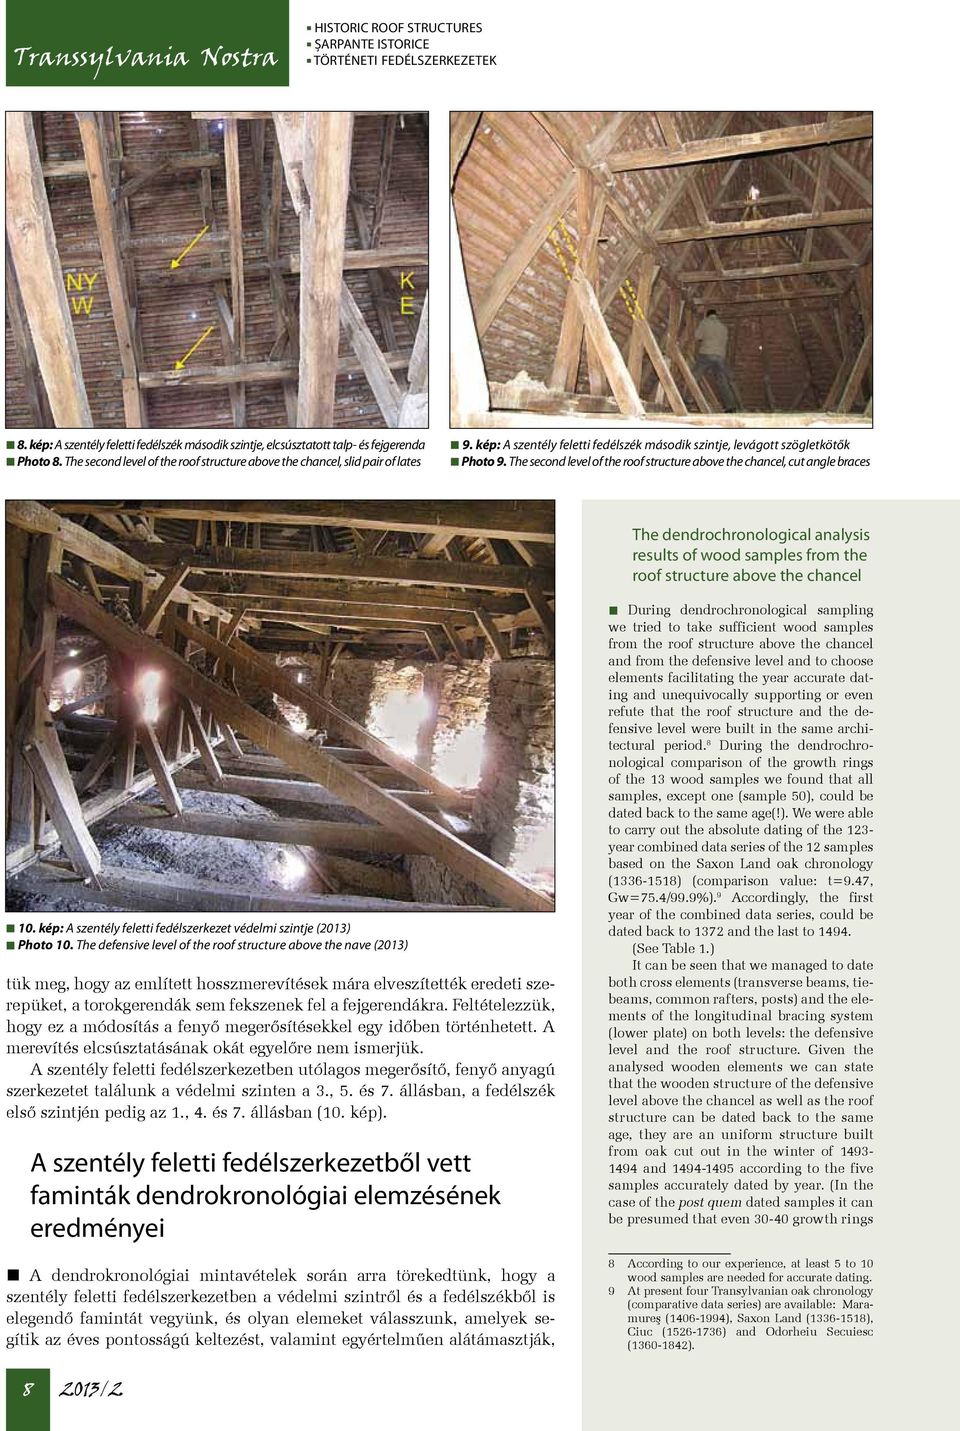 The second level of the roof structure above the chancel, cut angle braces The dendrochronological analysis results of wood samples from the roof structure above the chancel 10.